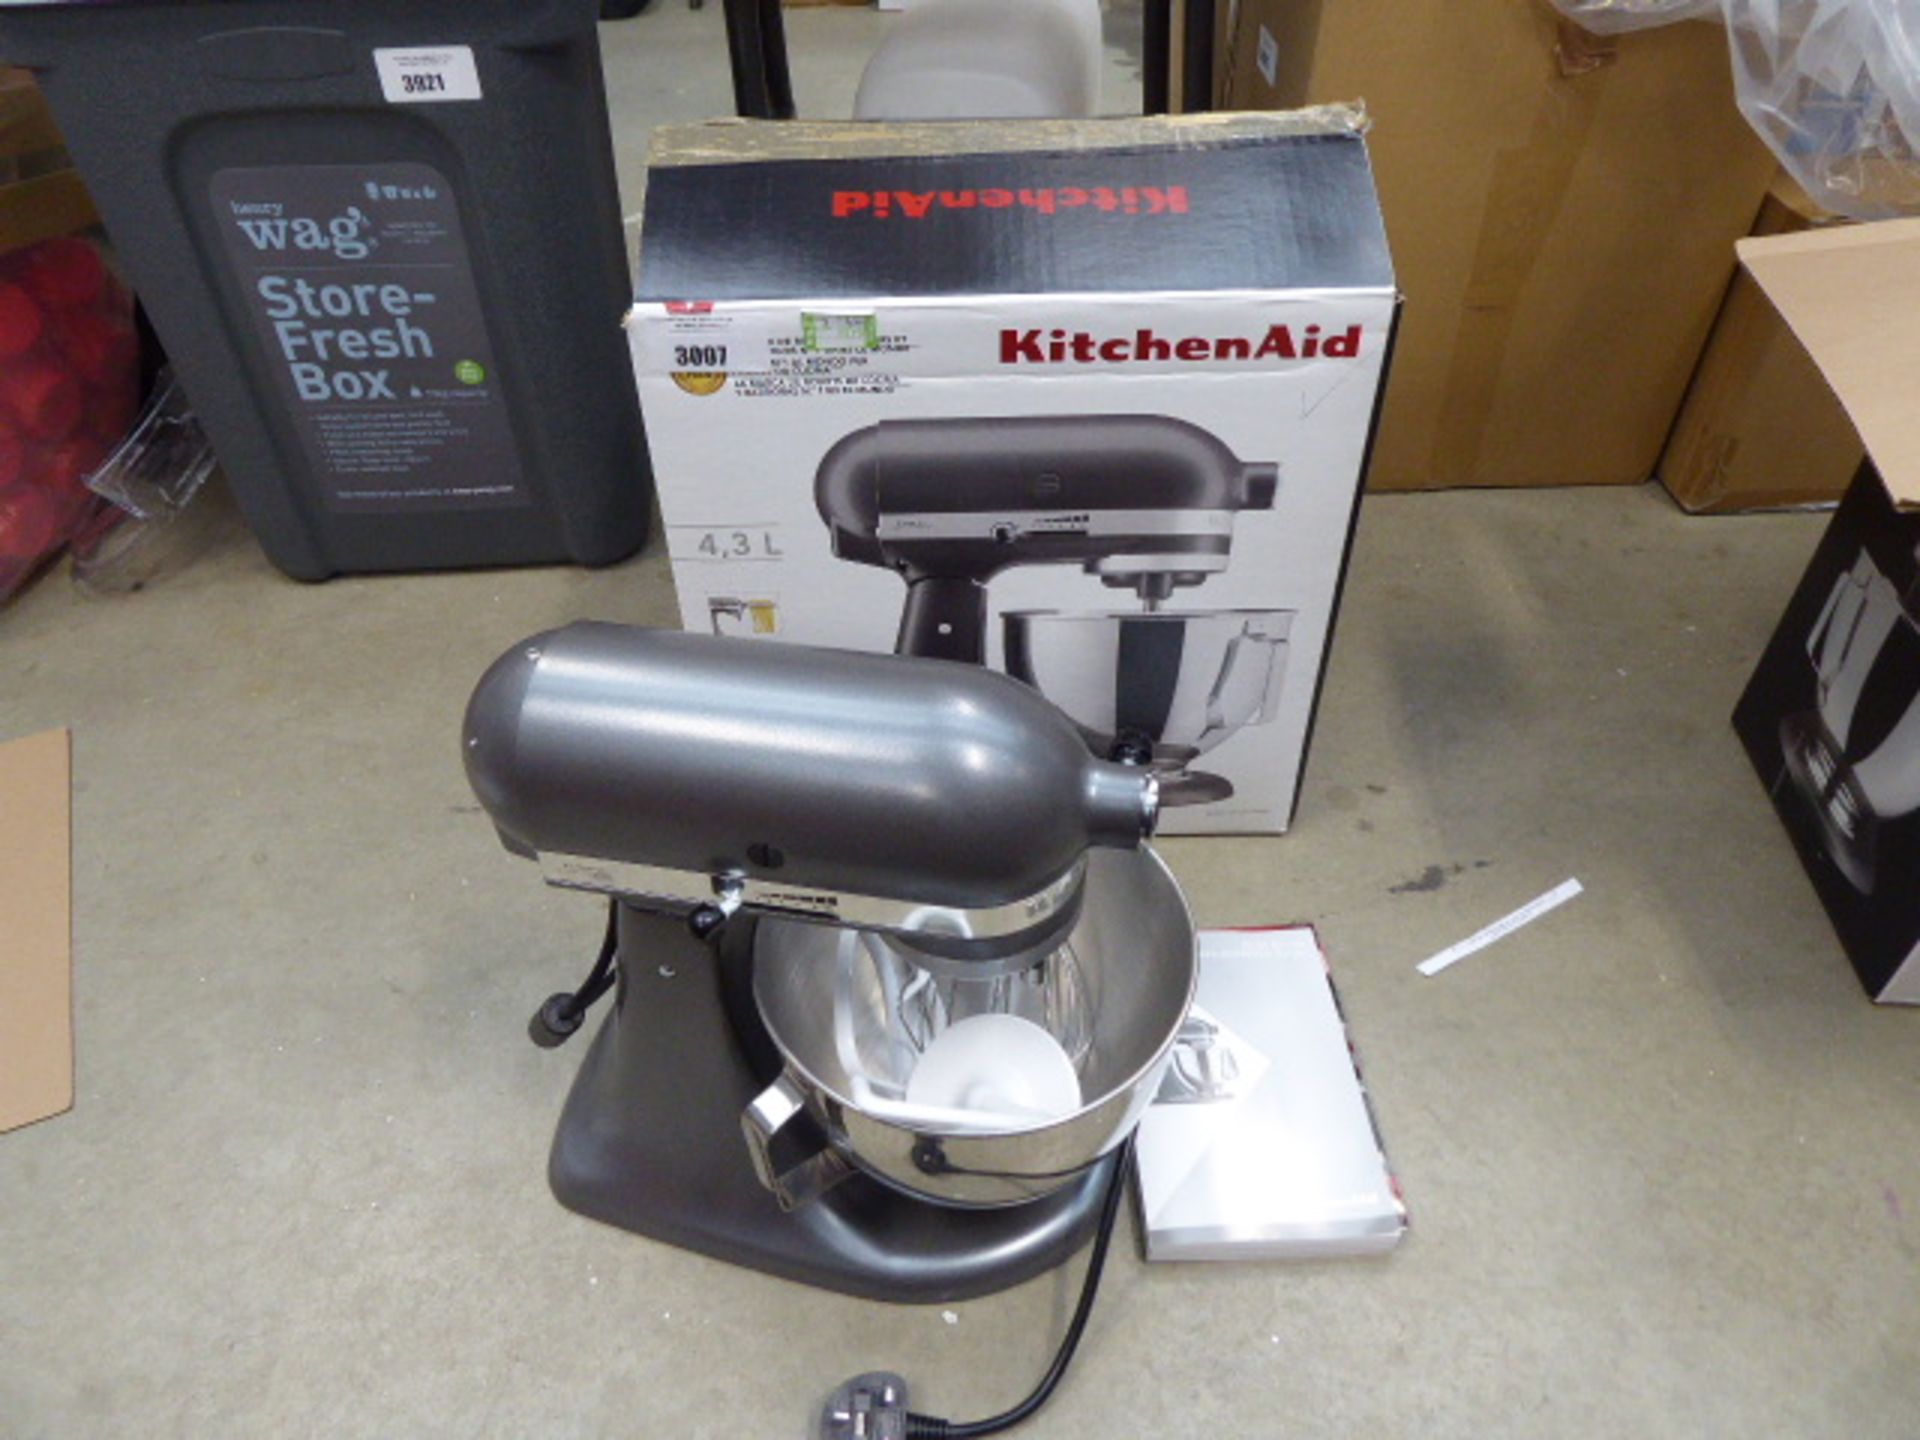 (TN118) Boxed Kitchenaid 4.3 litre mixer Condition report: Opened box, appears little or not use